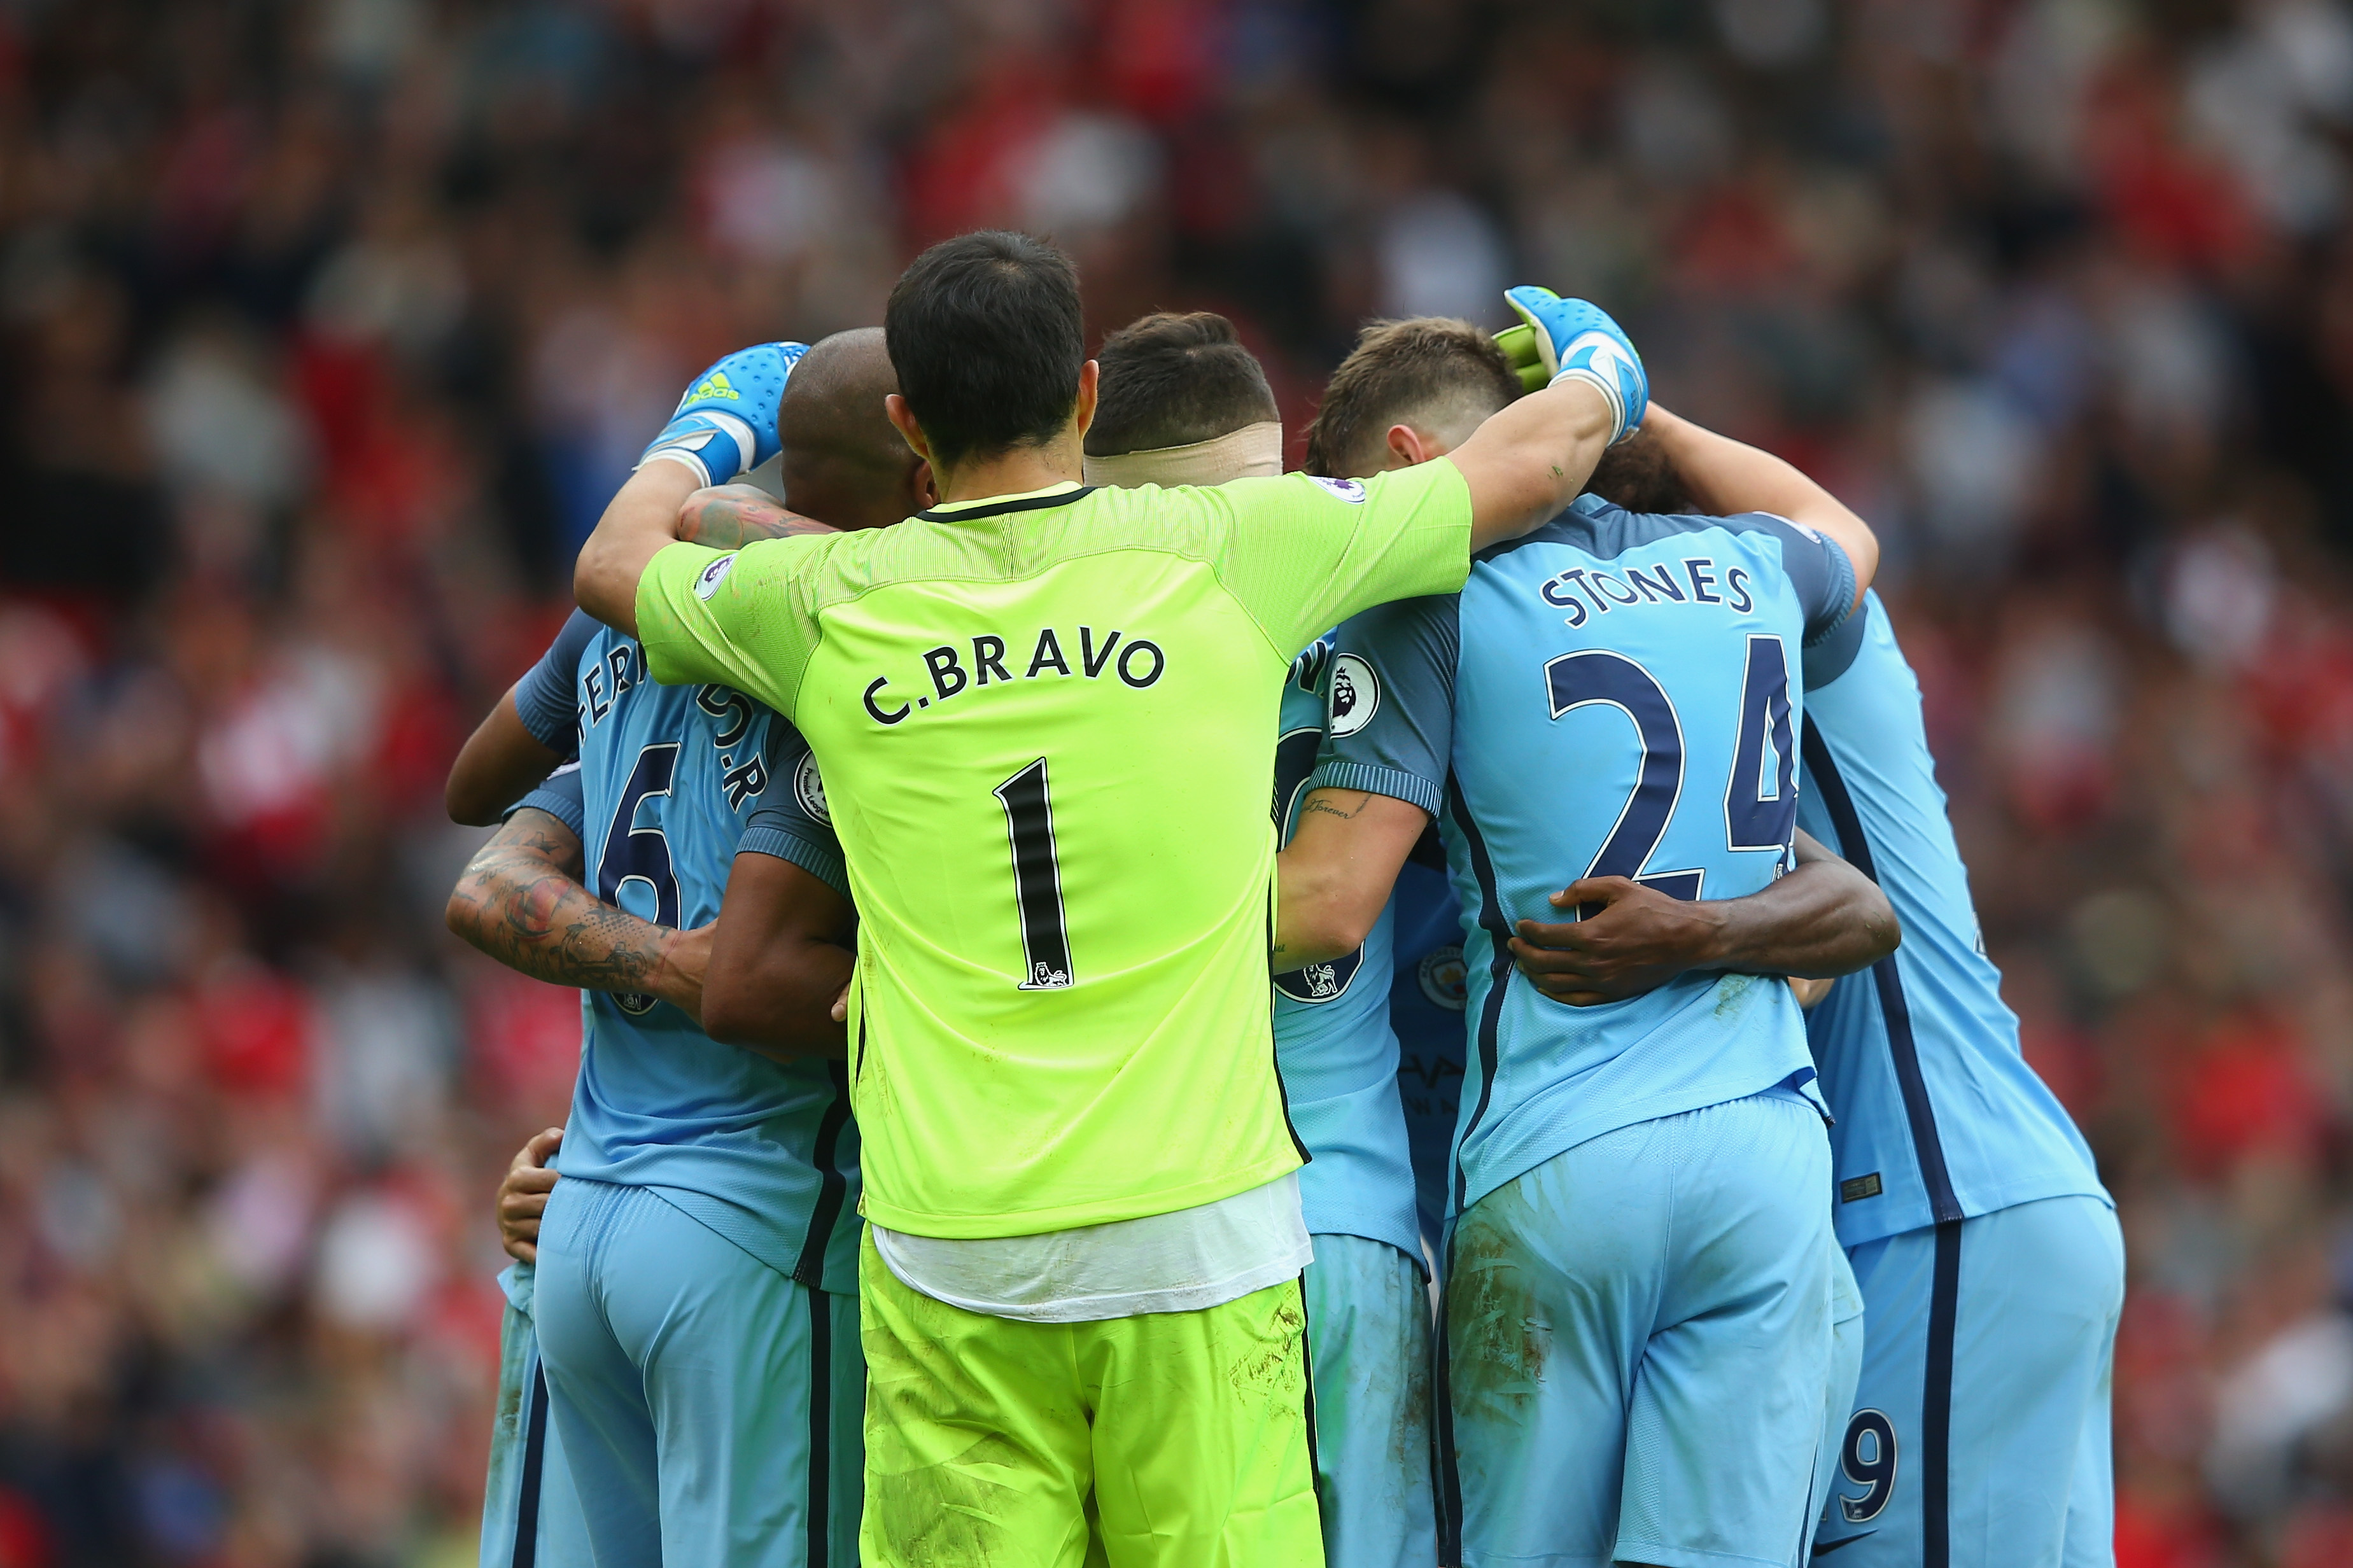 MANCHESTER, ENGLAND - SEPTEMBER 10:  Manchester City players celebrate during the Premier League match between Manchester United and Manchester City at Old Trafford on September 10, 2016 in Manchester, England.  (Photo by Alex Livesey/Getty Images)